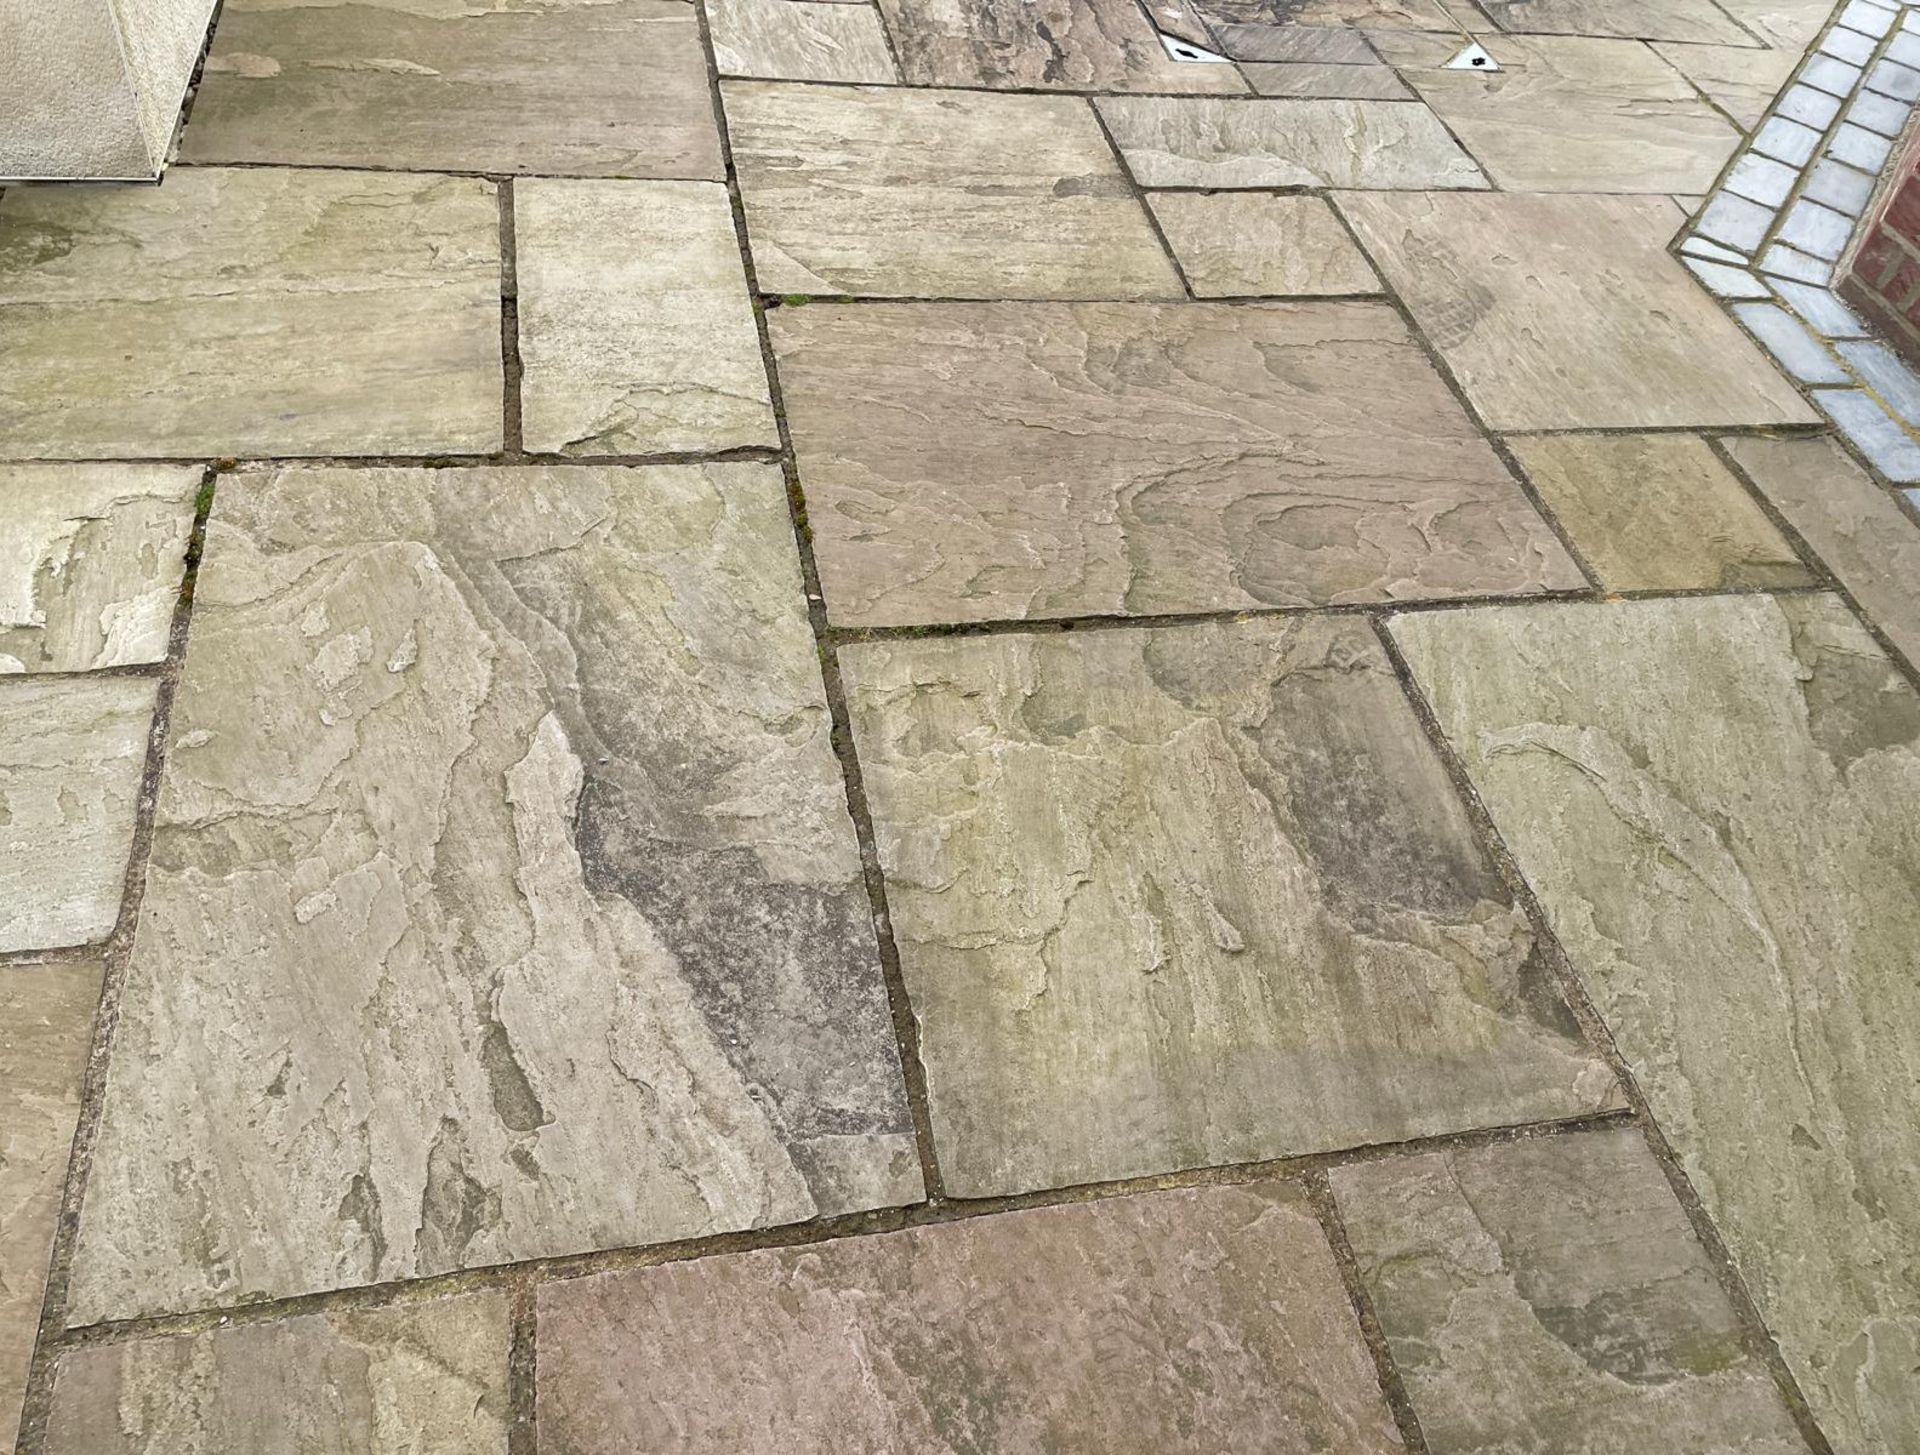 Large Quantity of Yorkstone Paving - Over 340sqm - CL896 - NO VAT ON THE HAMMER - Location: Wilmslow - Image 48 of 57